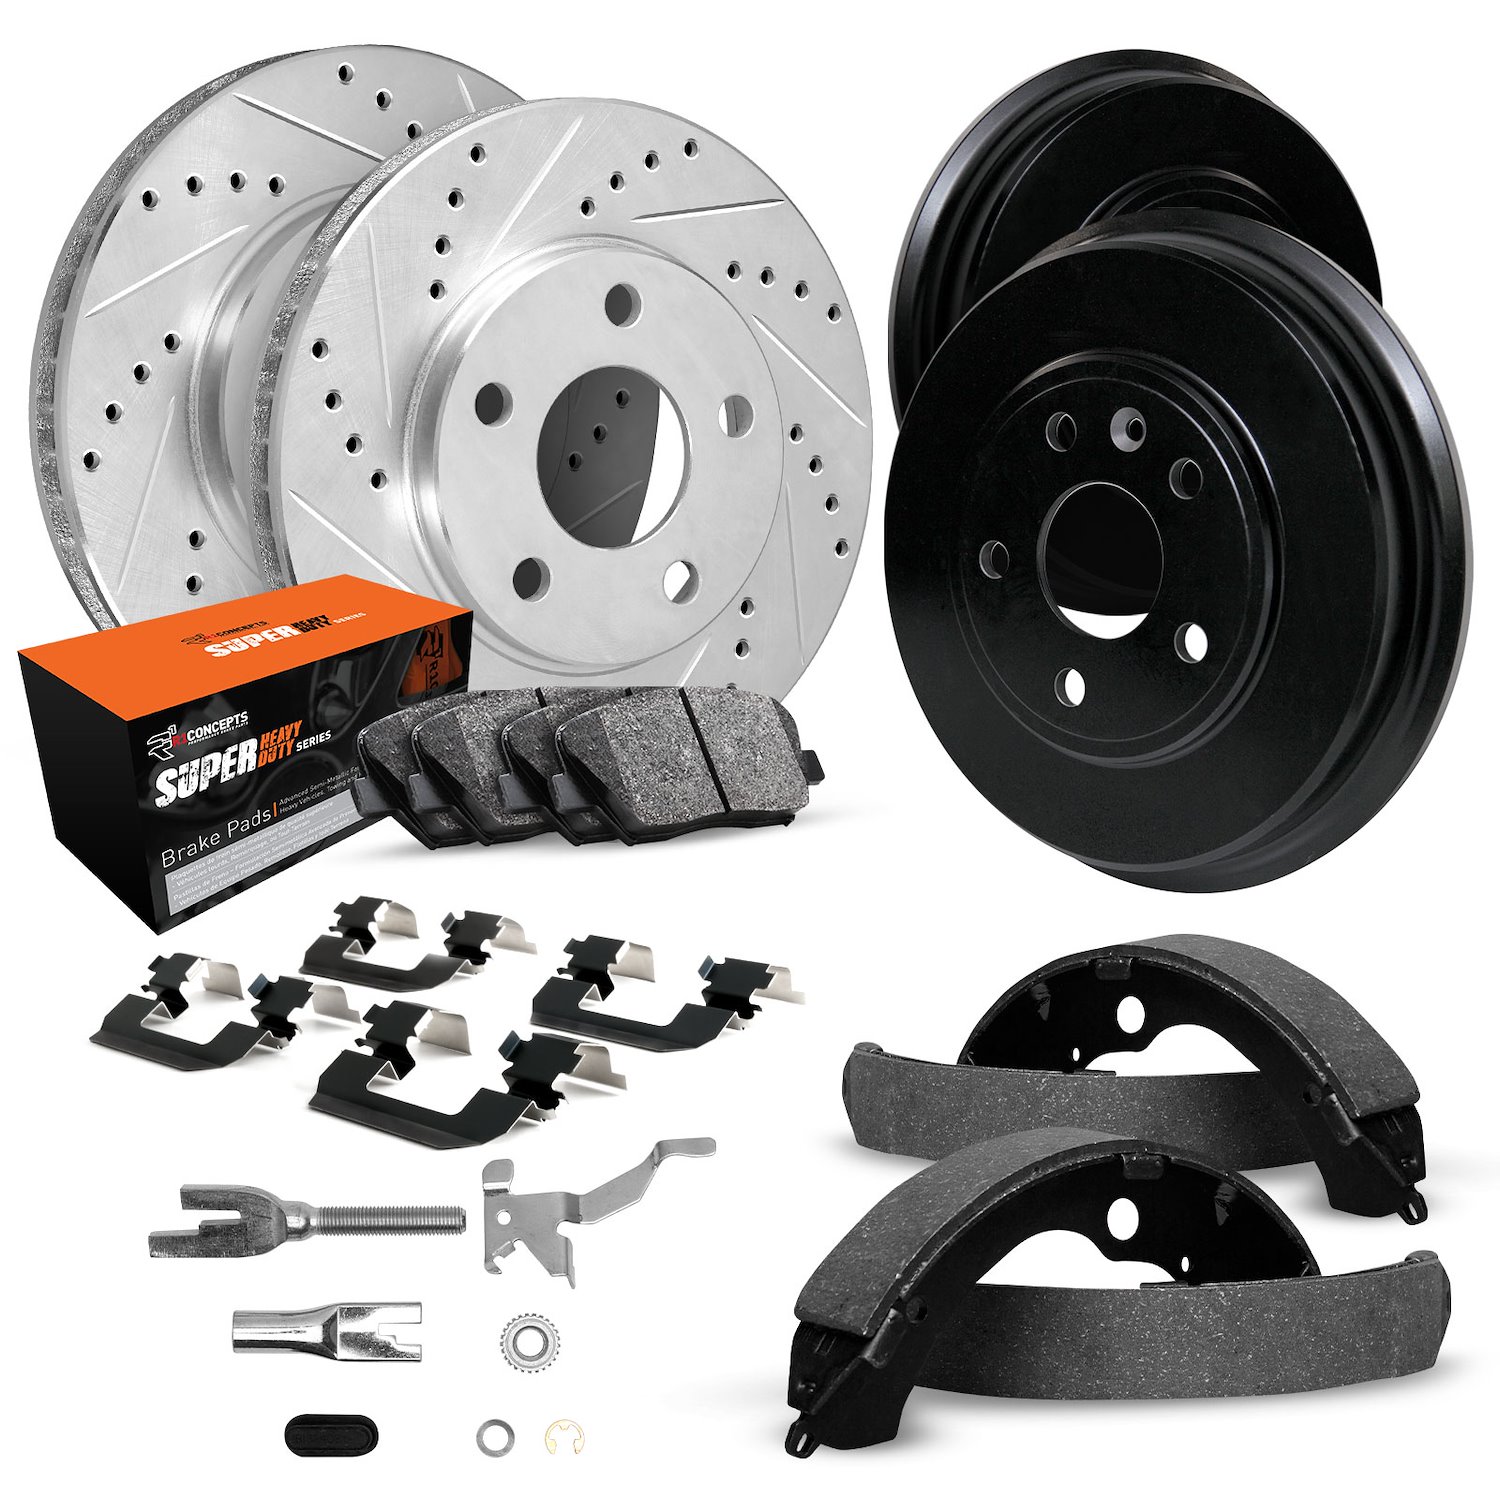 E-Line Drilled/Slotted Silver Rotor & Drum Set w/Super-Duty Pads, Shoes/Hardware/Adjusters, 1990-1991 Ford/Lincoln/Mercury/Mazda